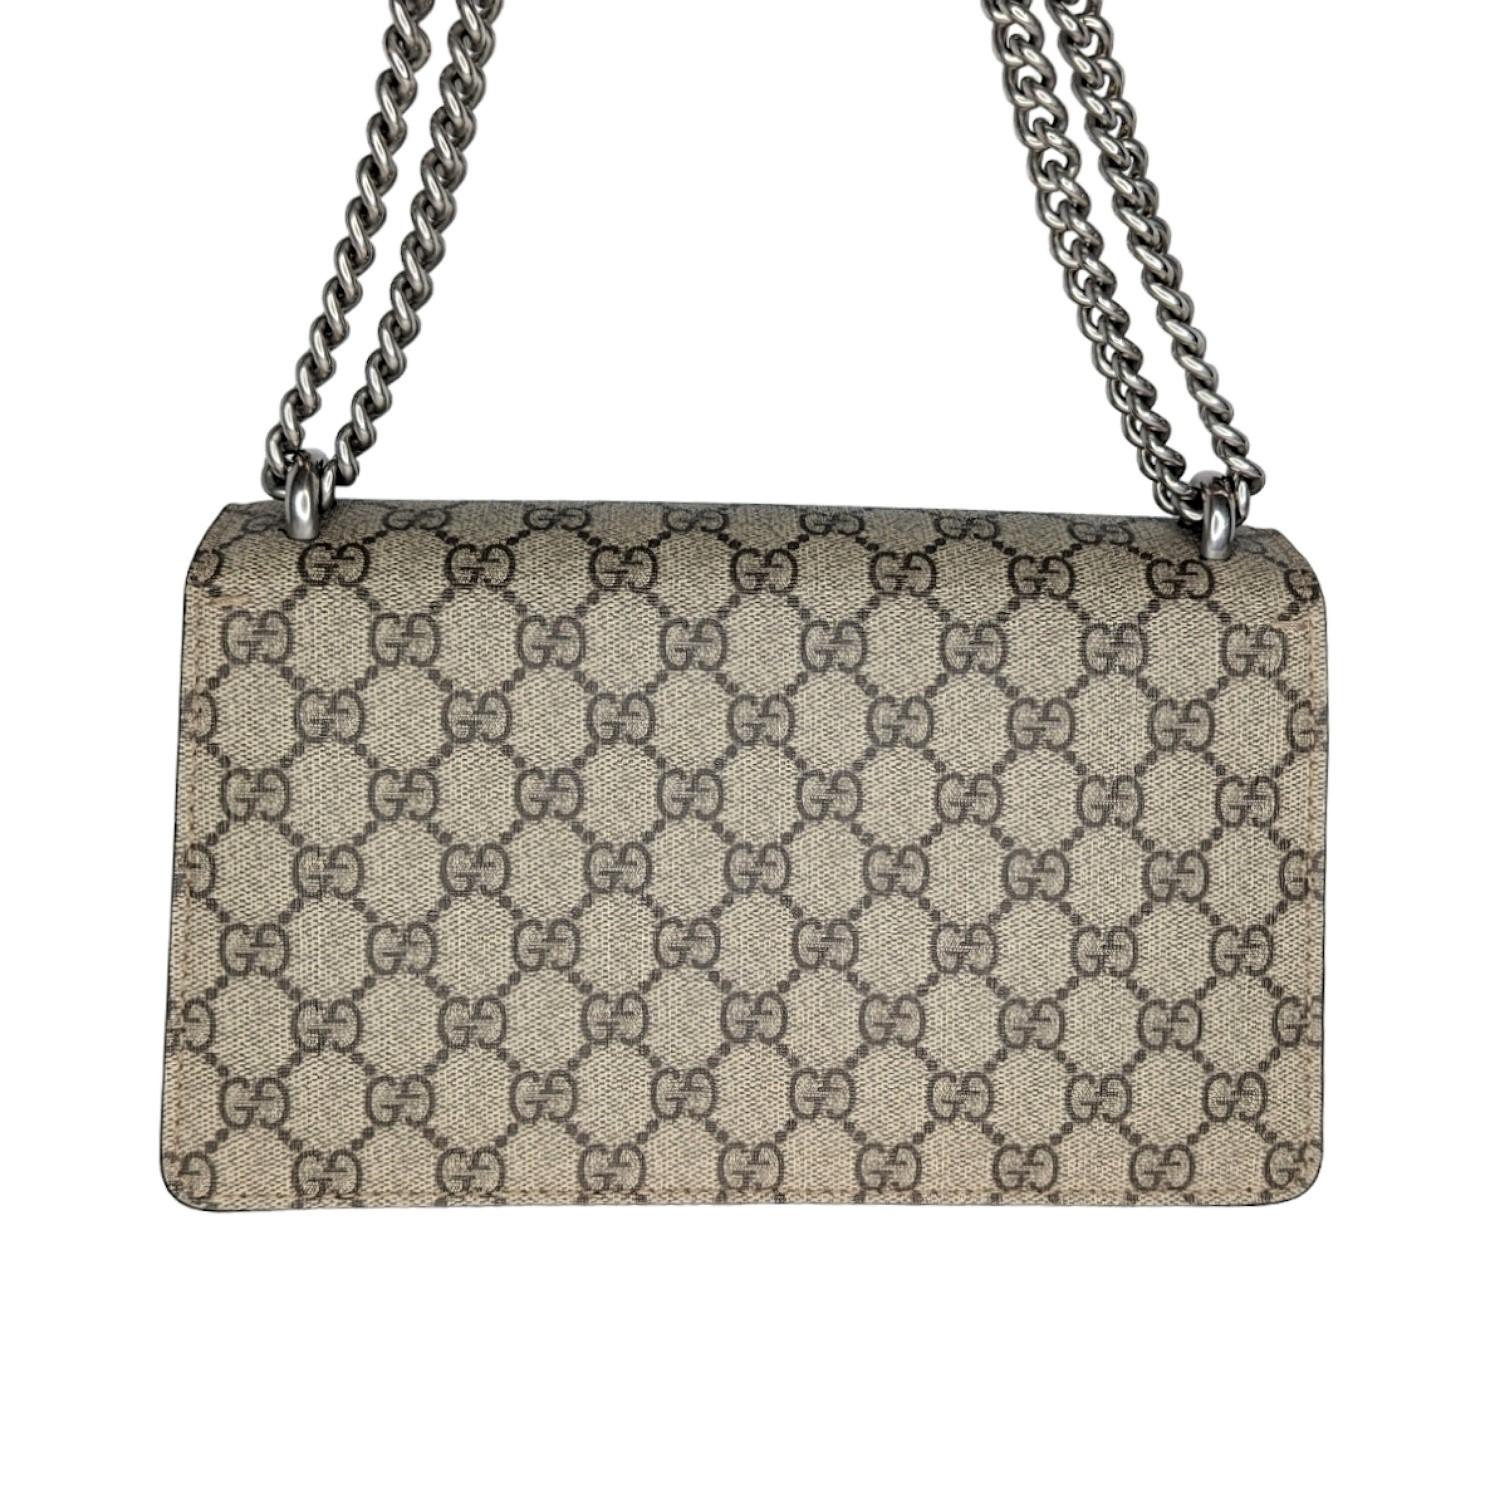 The small Dionysus shoulder bag is presented in the signature GG pattern, trimmed with taupe suede details. The shape is defined by the defining tiger head closure—a unique detail referencing the Greek god Dionysus, who in myth is said to have